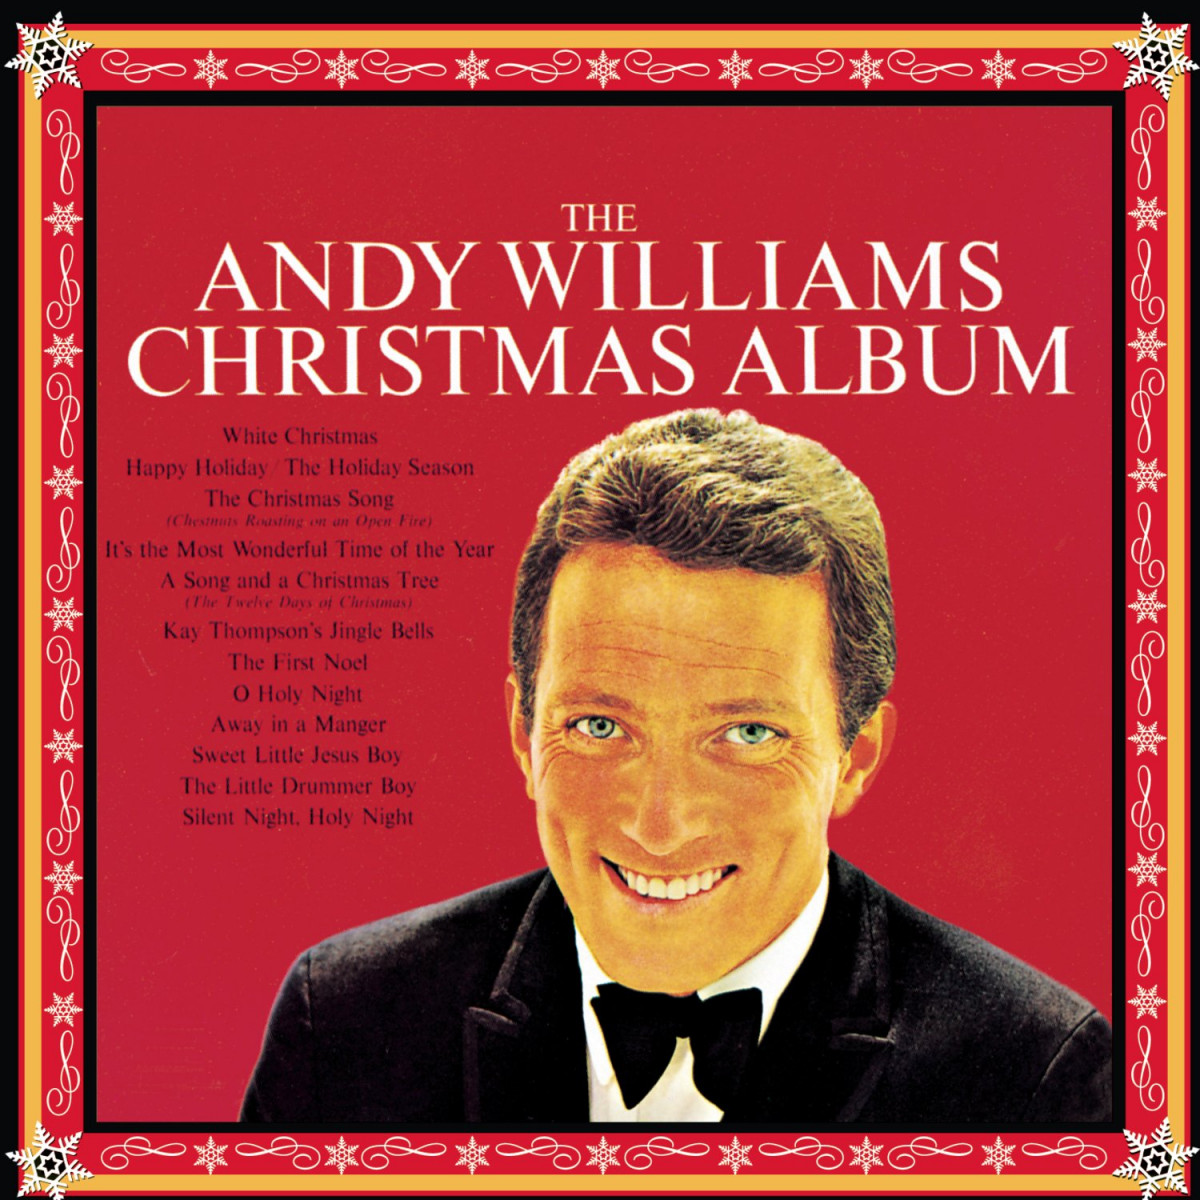 Andy Williams - The little drummer boy